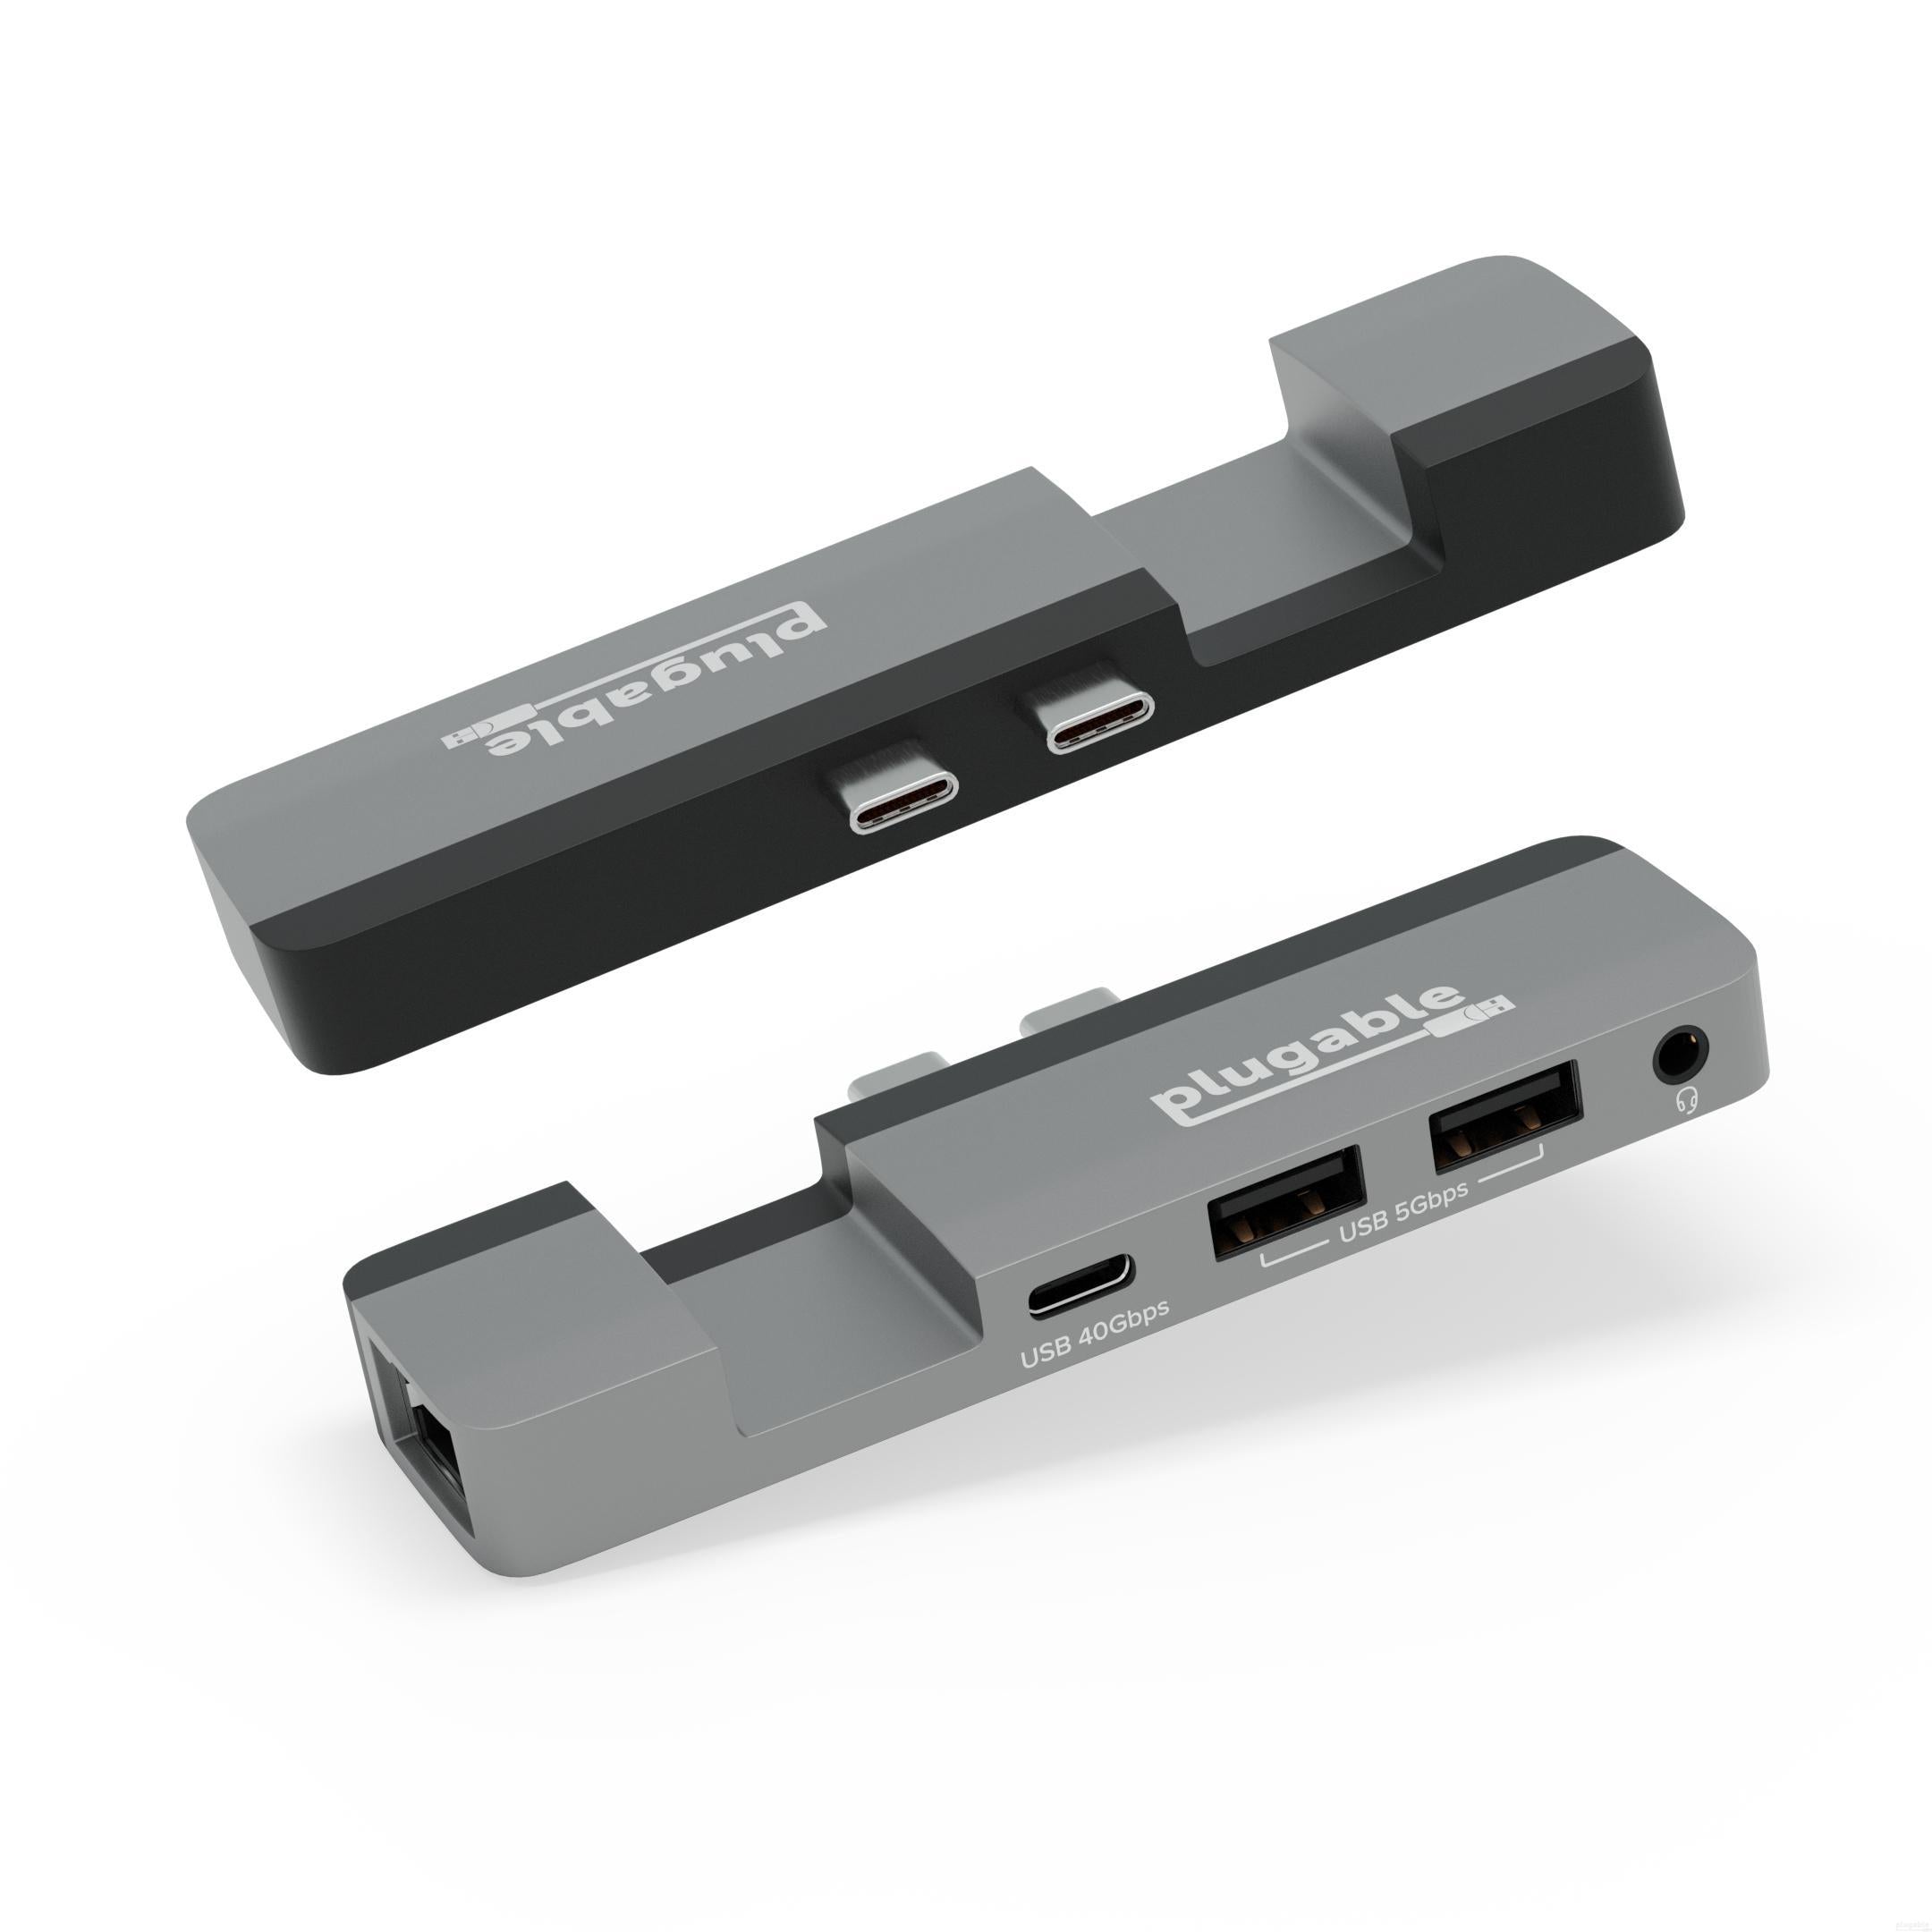 Plugable 4-in-1 USB-C Hub with 4K HDMI, 100W Charging – Plugable  Technologies